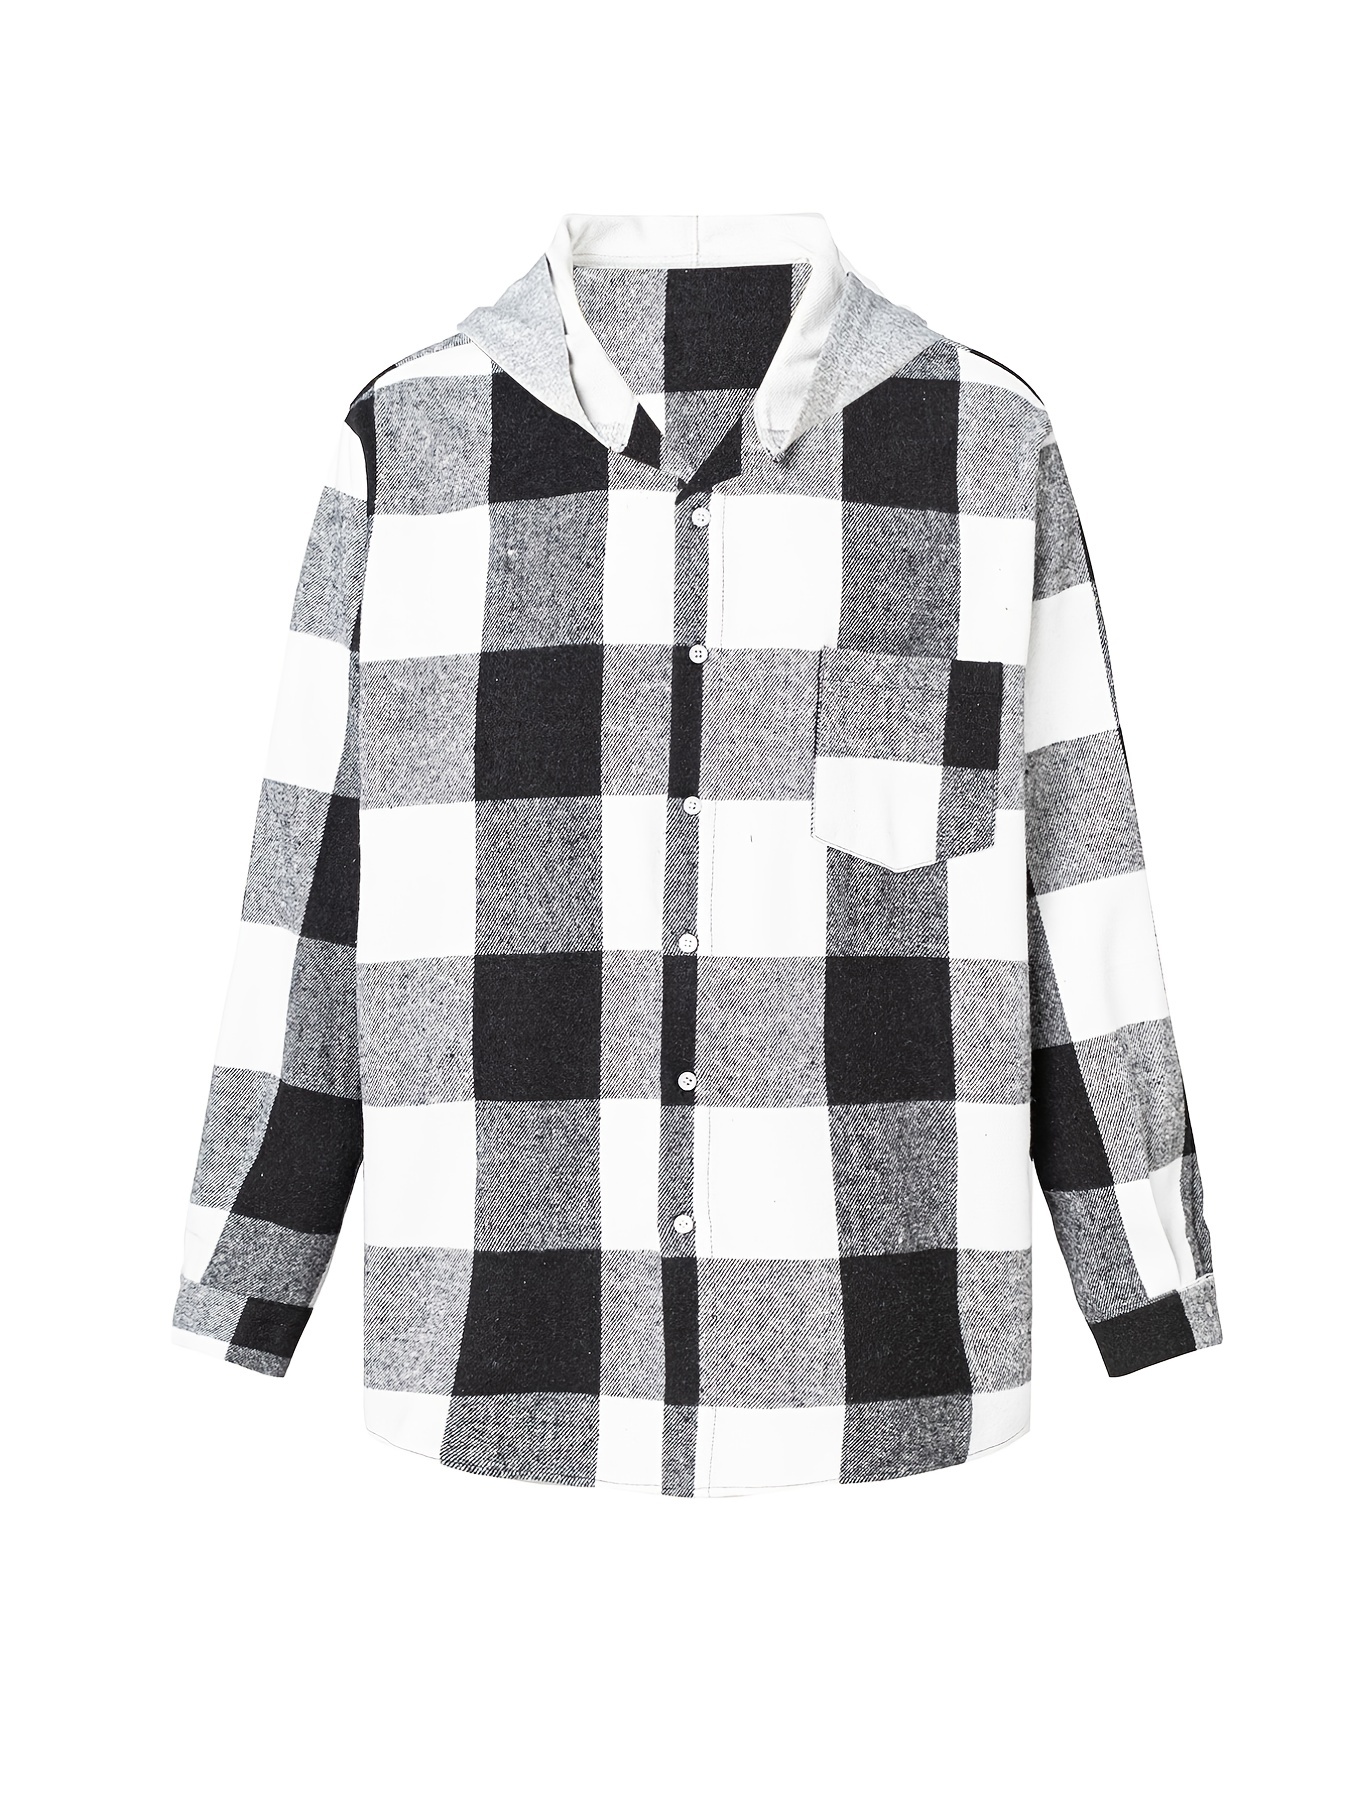 Black And White Plaid Shirt From H&M - Today's Outfit Style